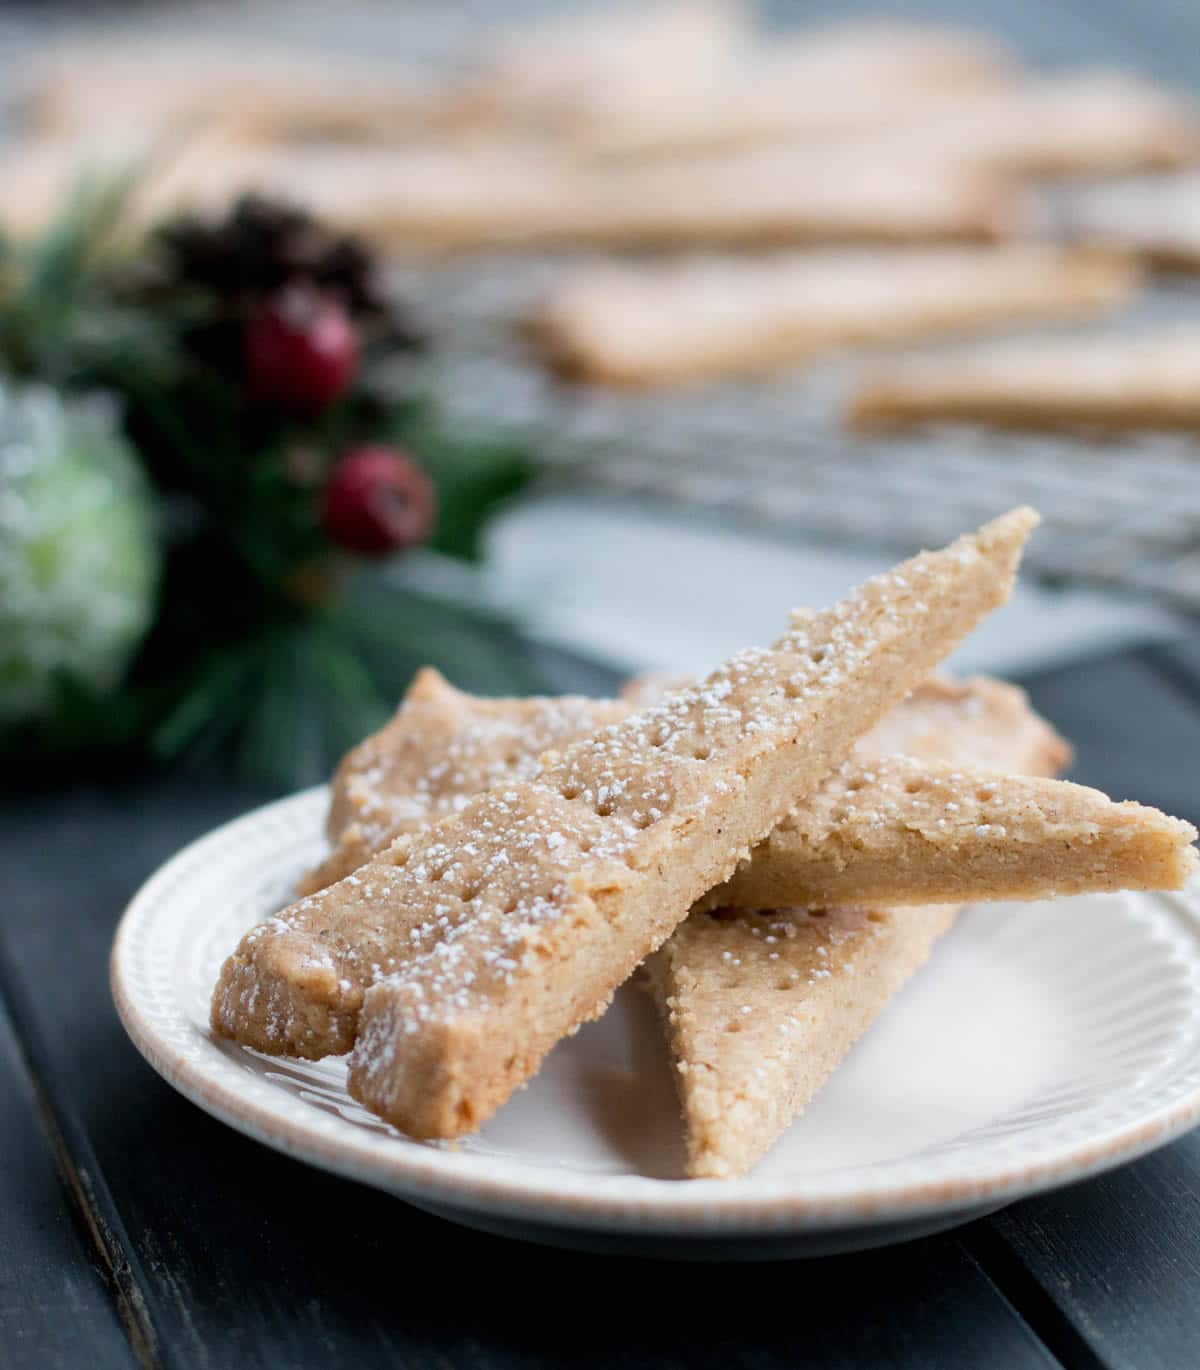 Spiced Shortbread mixes up in one bowl and bakes up to a lovely buttery, crisp but tender cookie that has the added warmth of cinnamon, ginger and cloves.